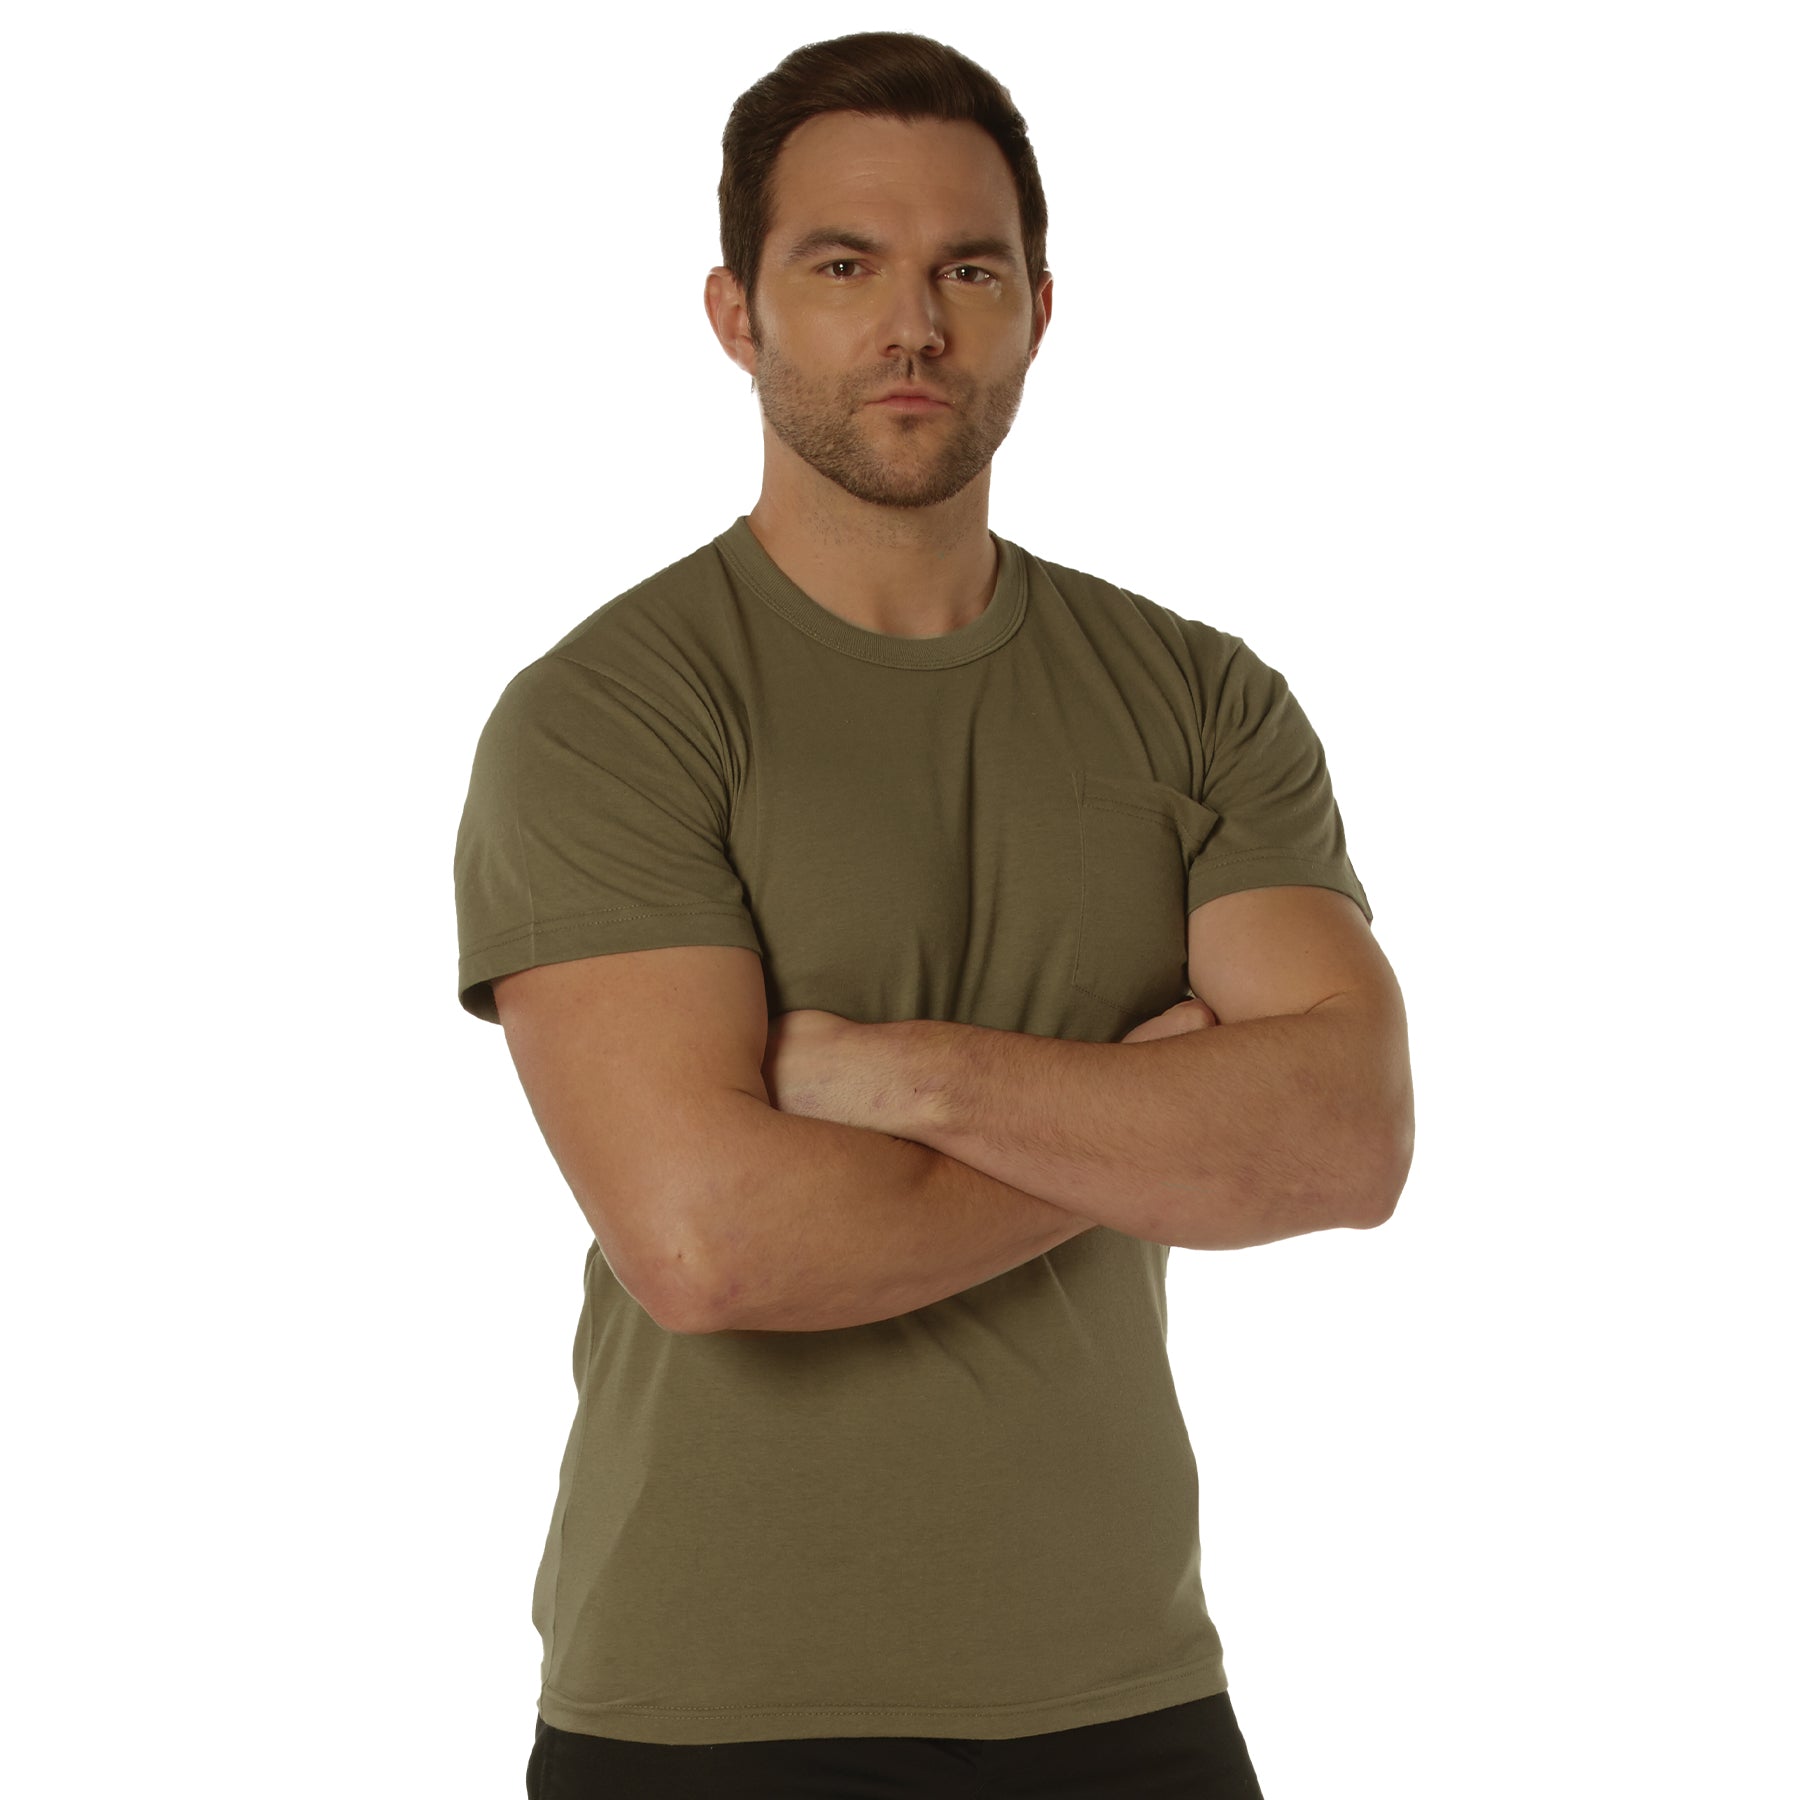 [AR 670-1] Poly/Cotton Pocket T-Shirts Coyote Brown AR 670-1